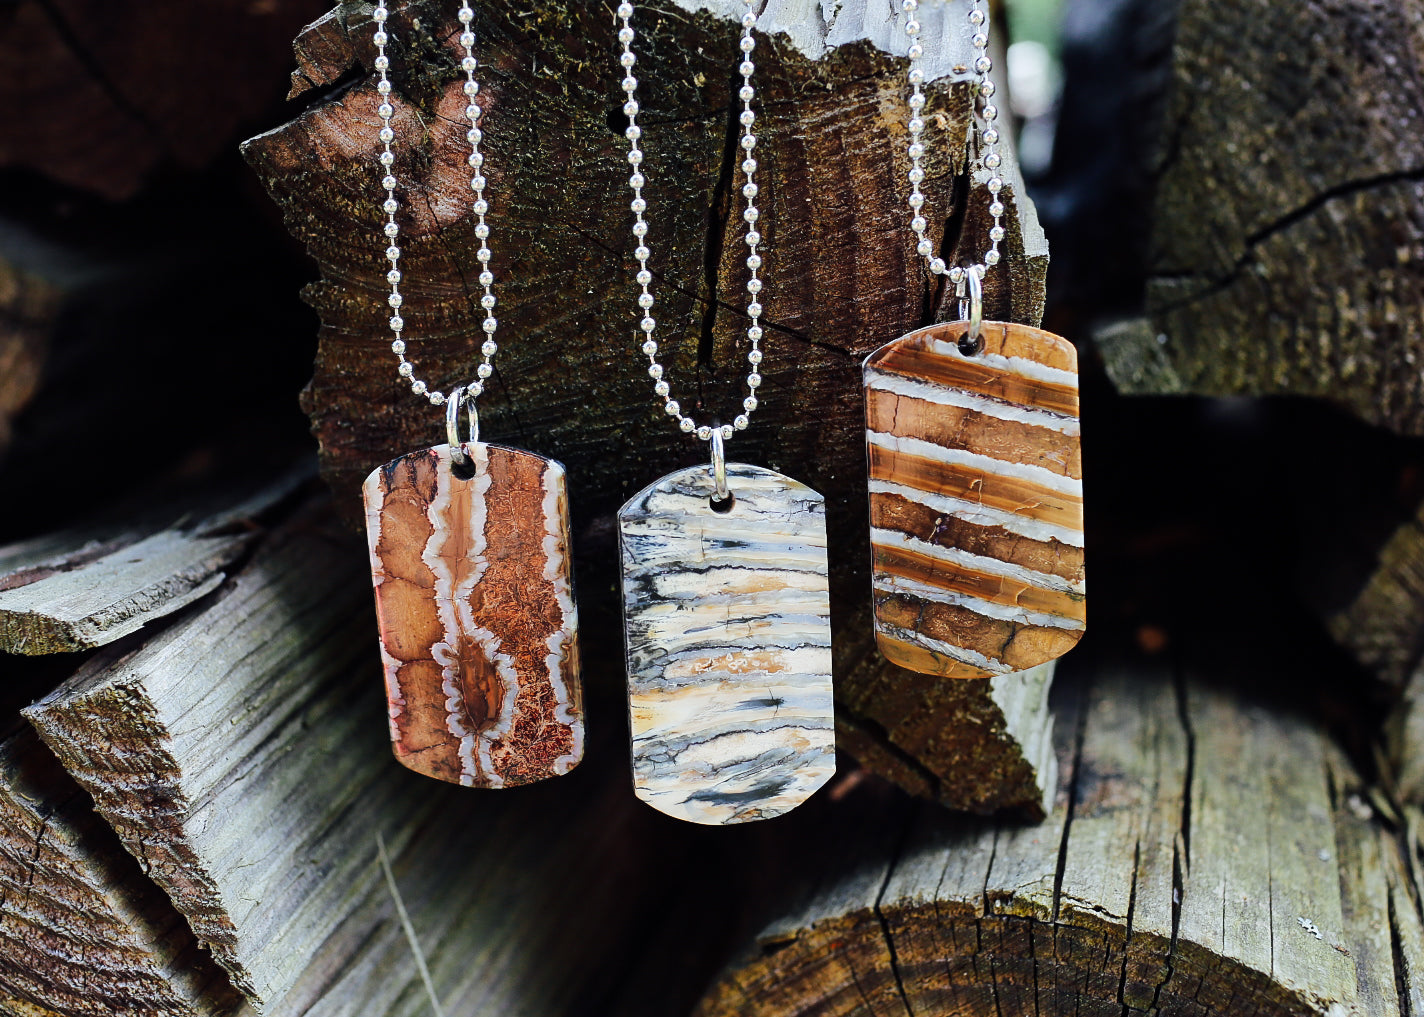 Mammoth Tooth Dog Tag Necklace